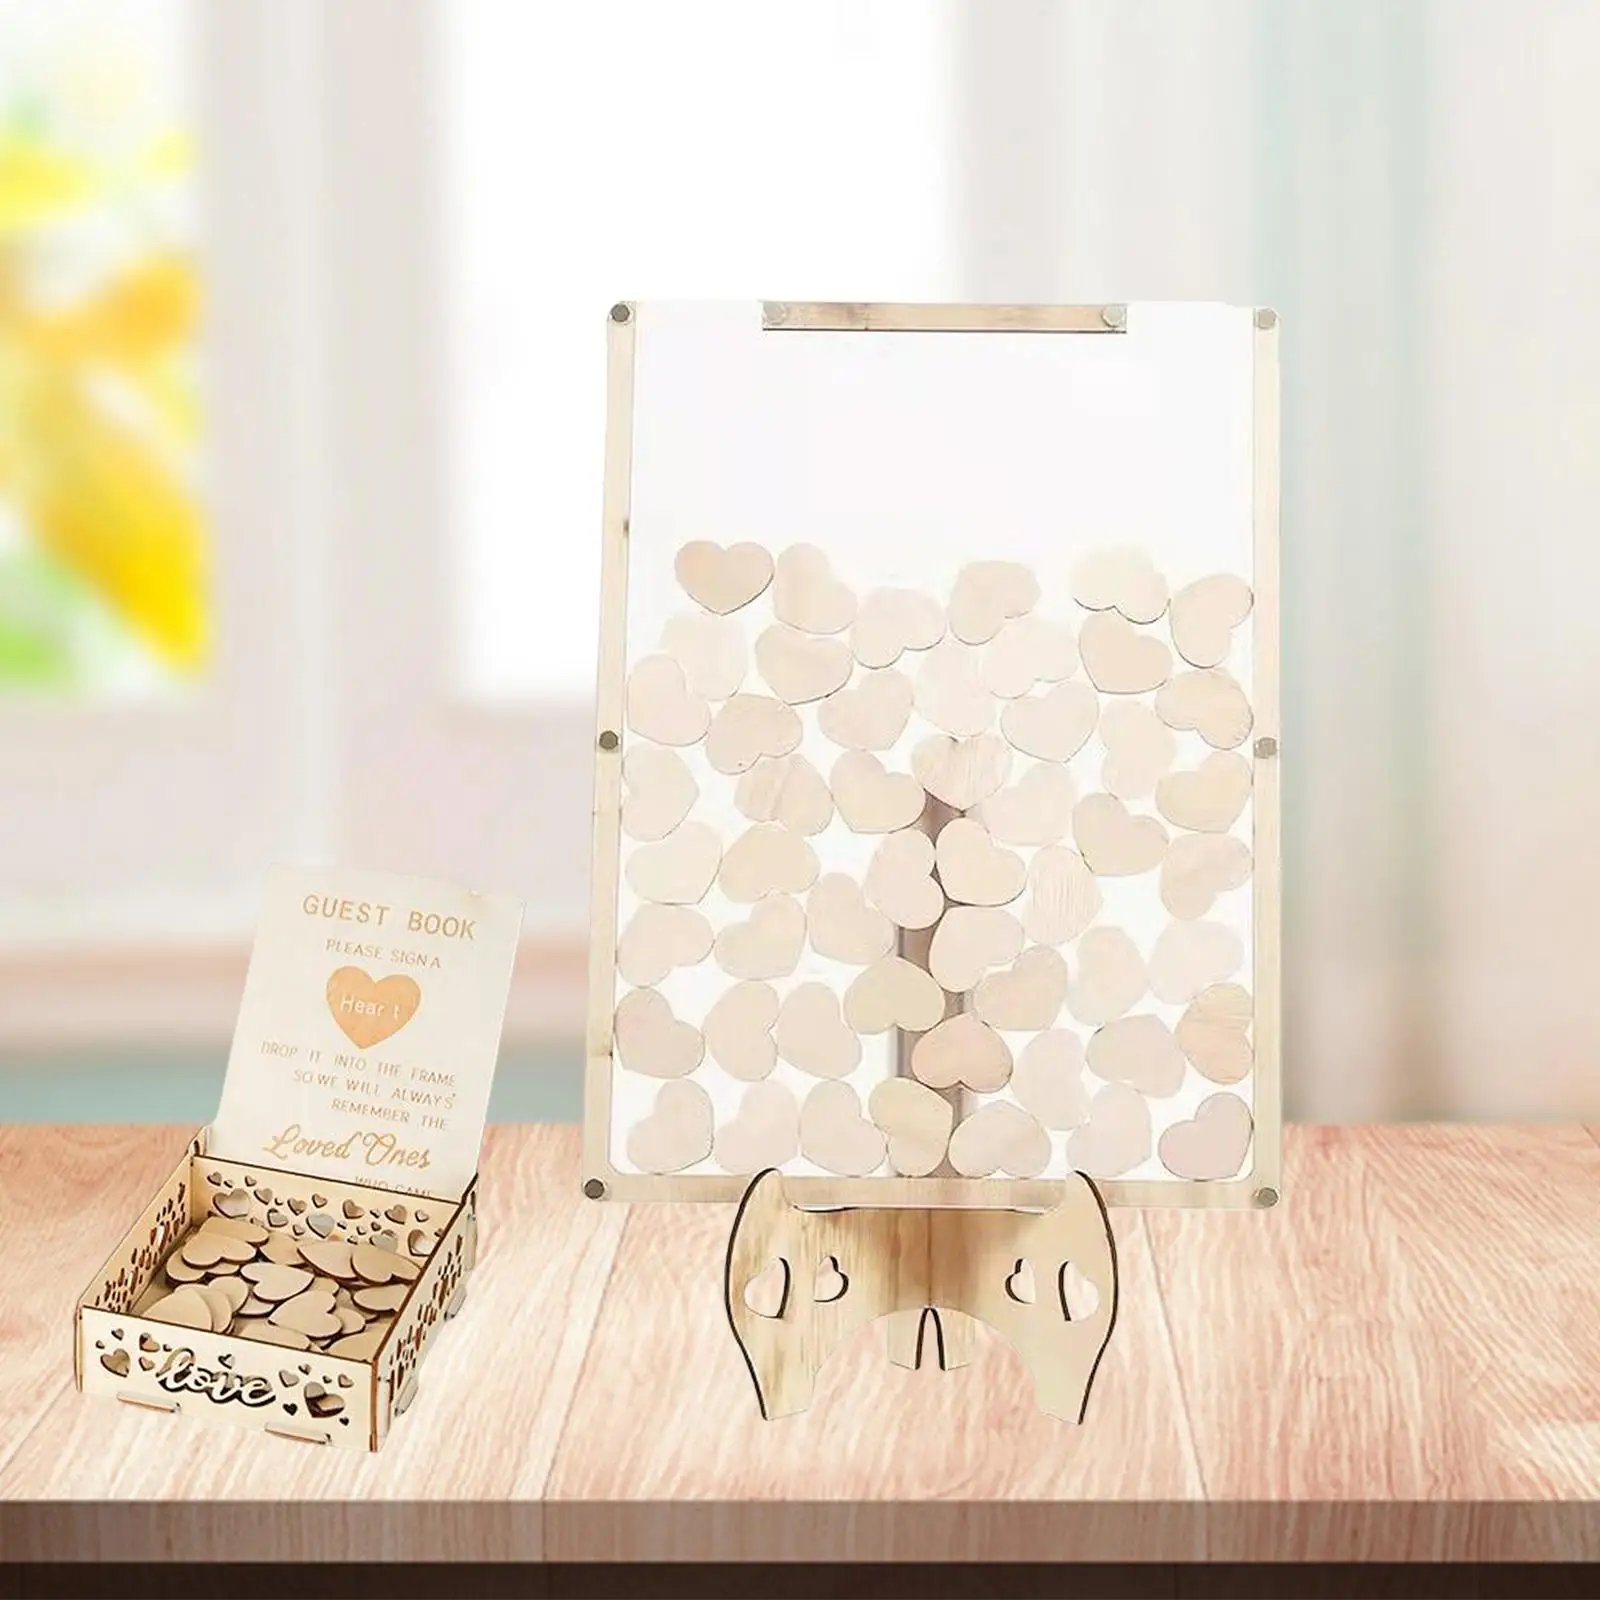 Wedding Guest Book/ Rustic Decor Gift Unique Sign Book/ for Special Events Baby Shower/ , Transparent Heart